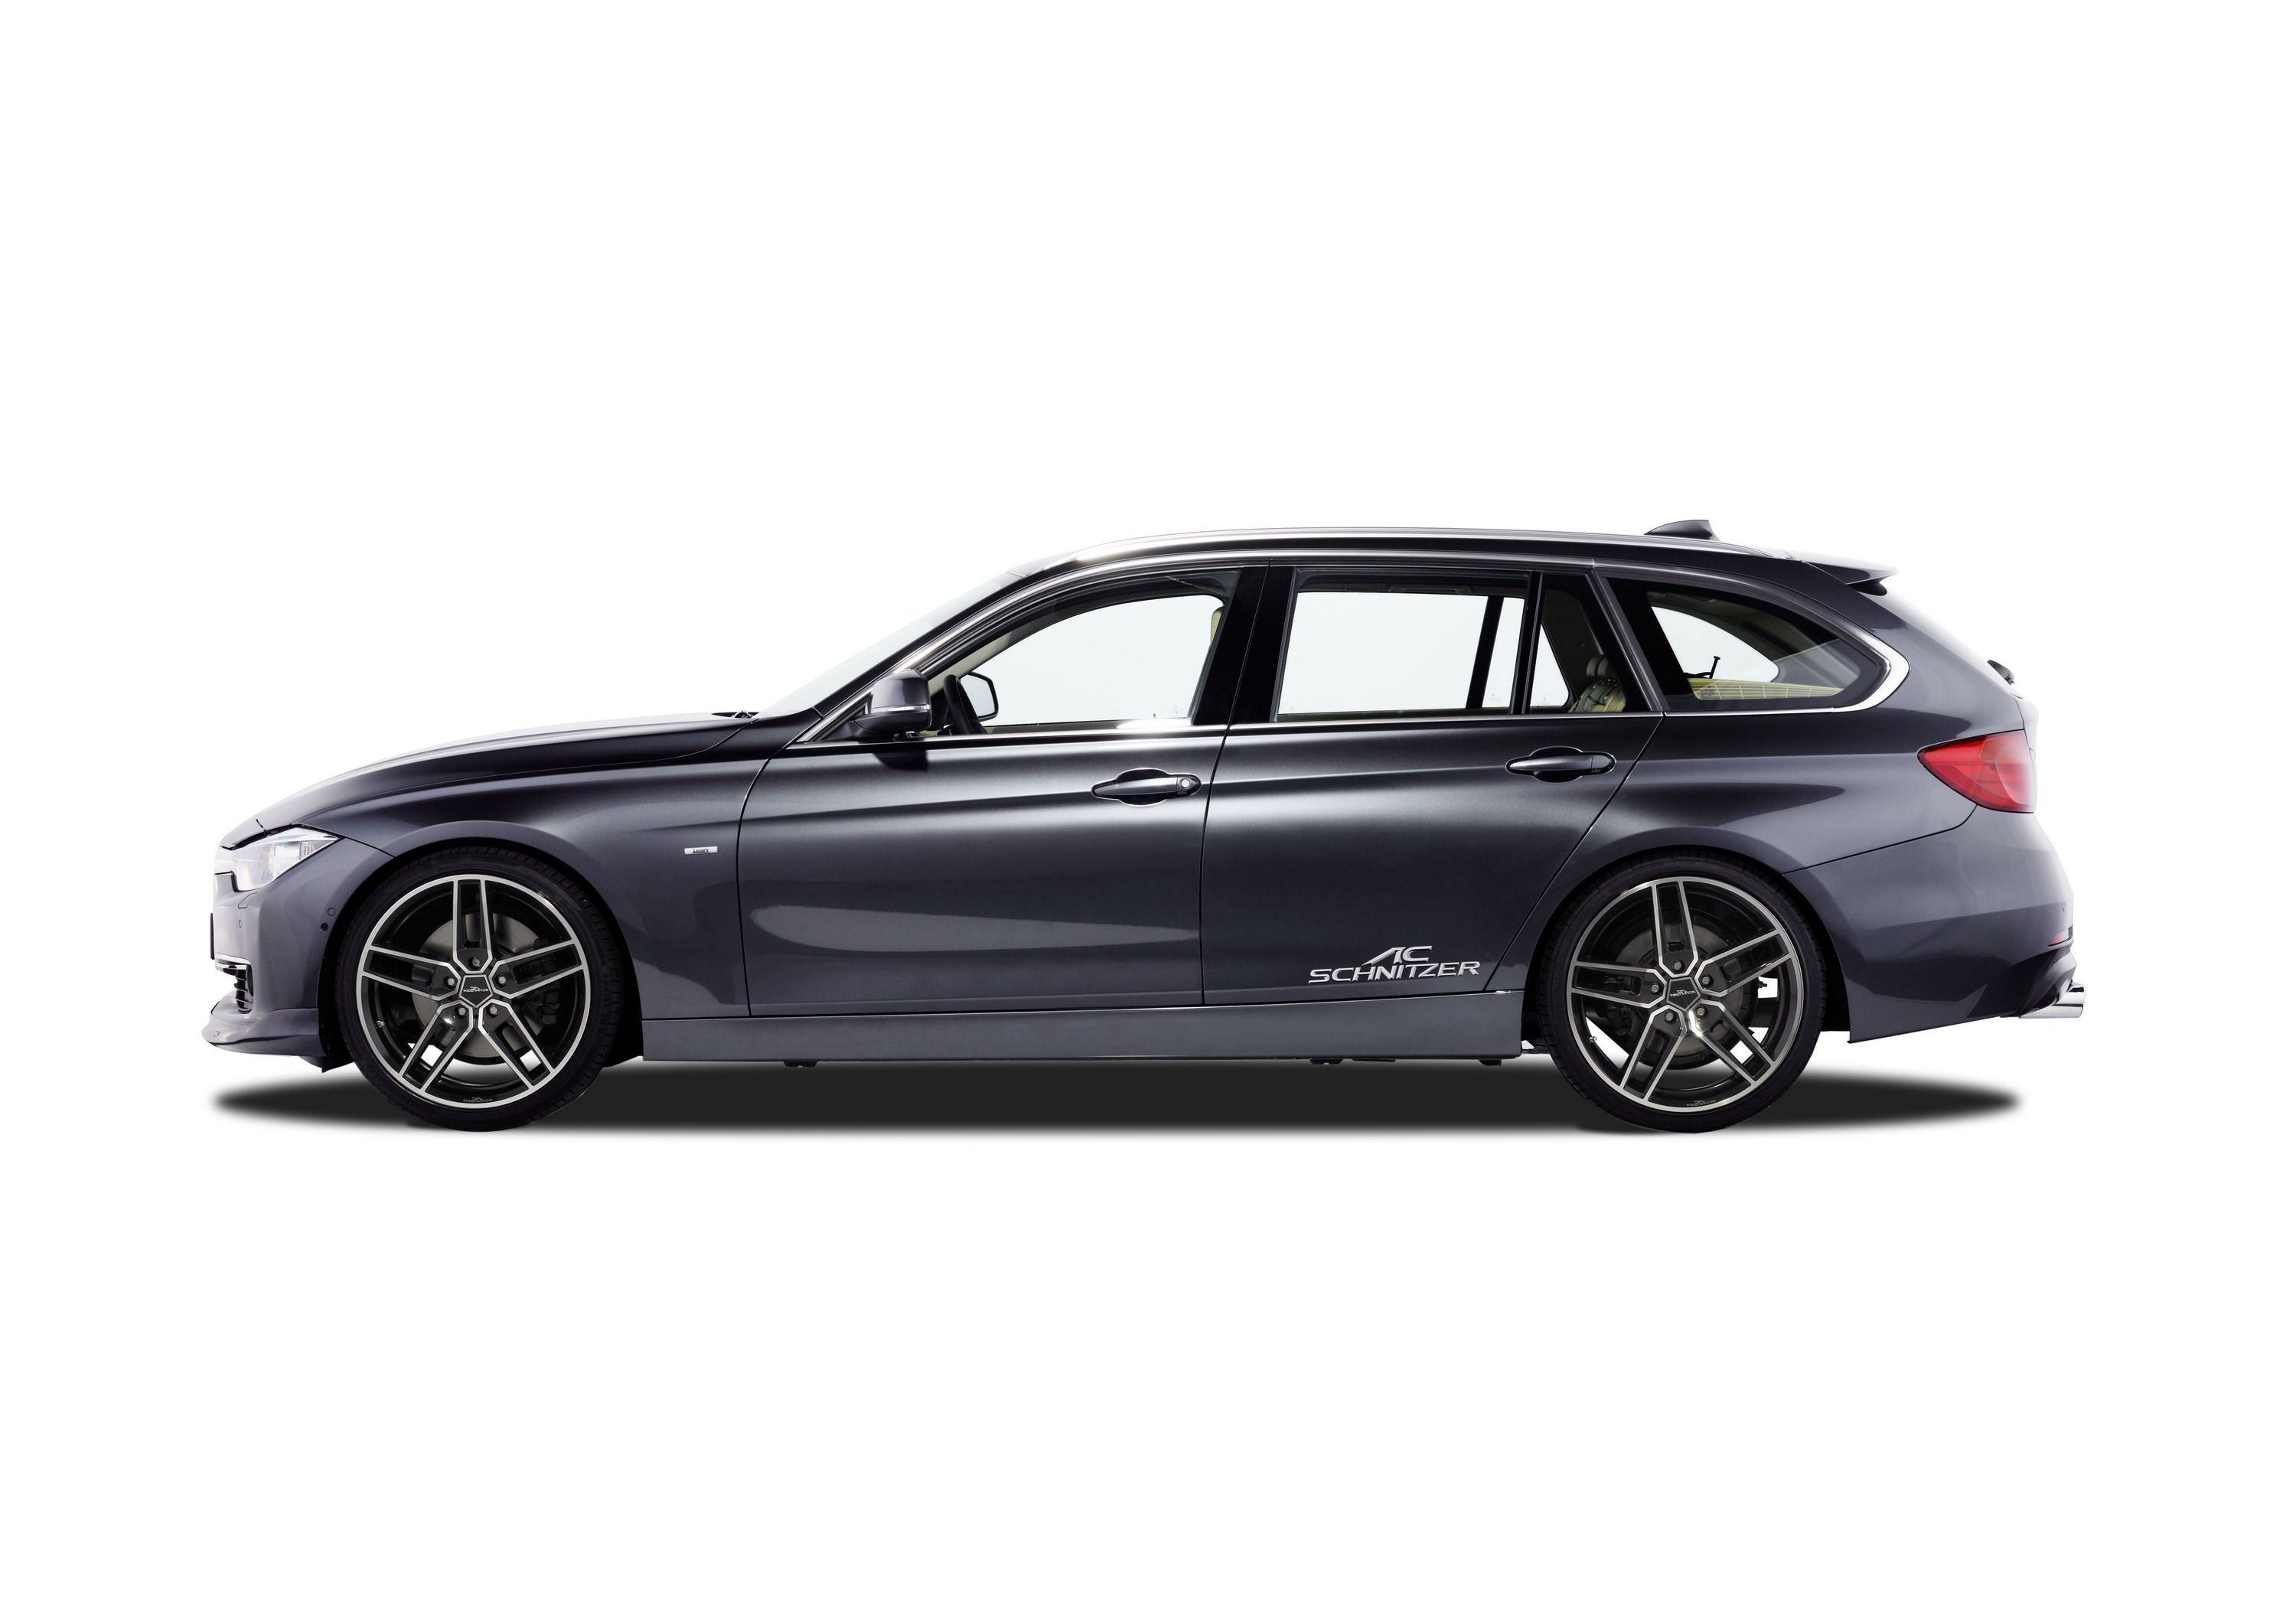 2013 BMW 3-Series Touring by AC Schnitzer